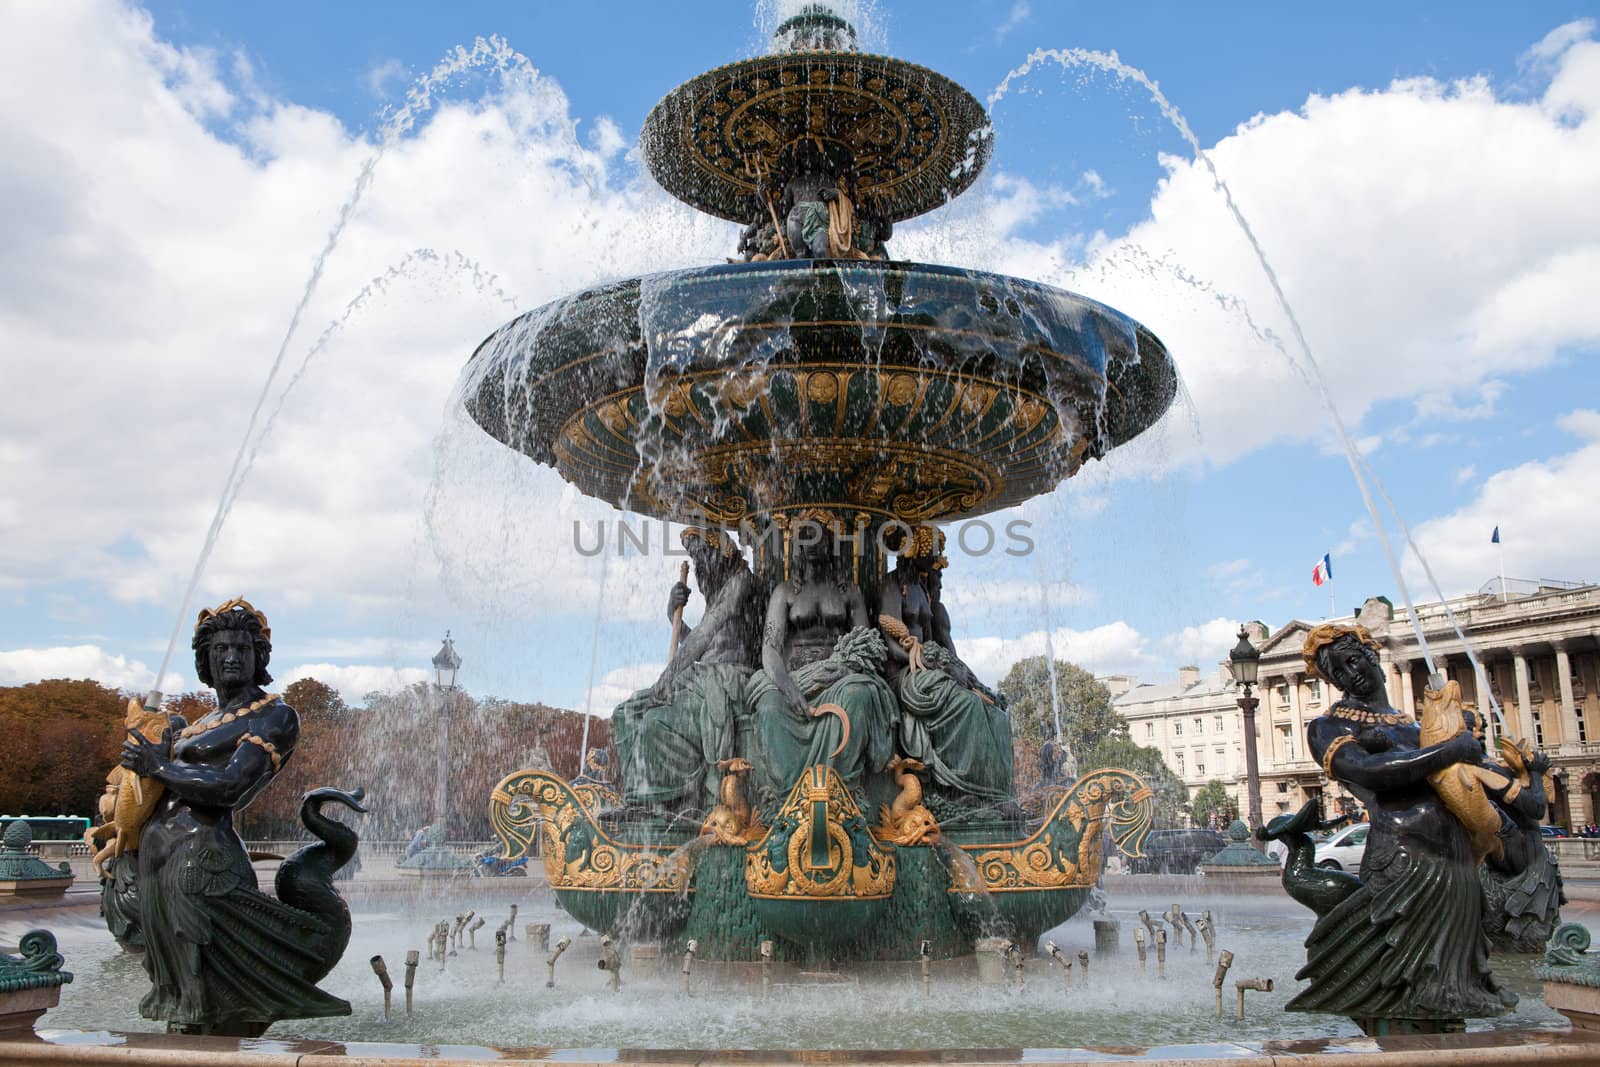 Landmark famous sculptural fountain of River Commerce and Navigation on the Place de la Concorde in Paris France on the cloudy sky background